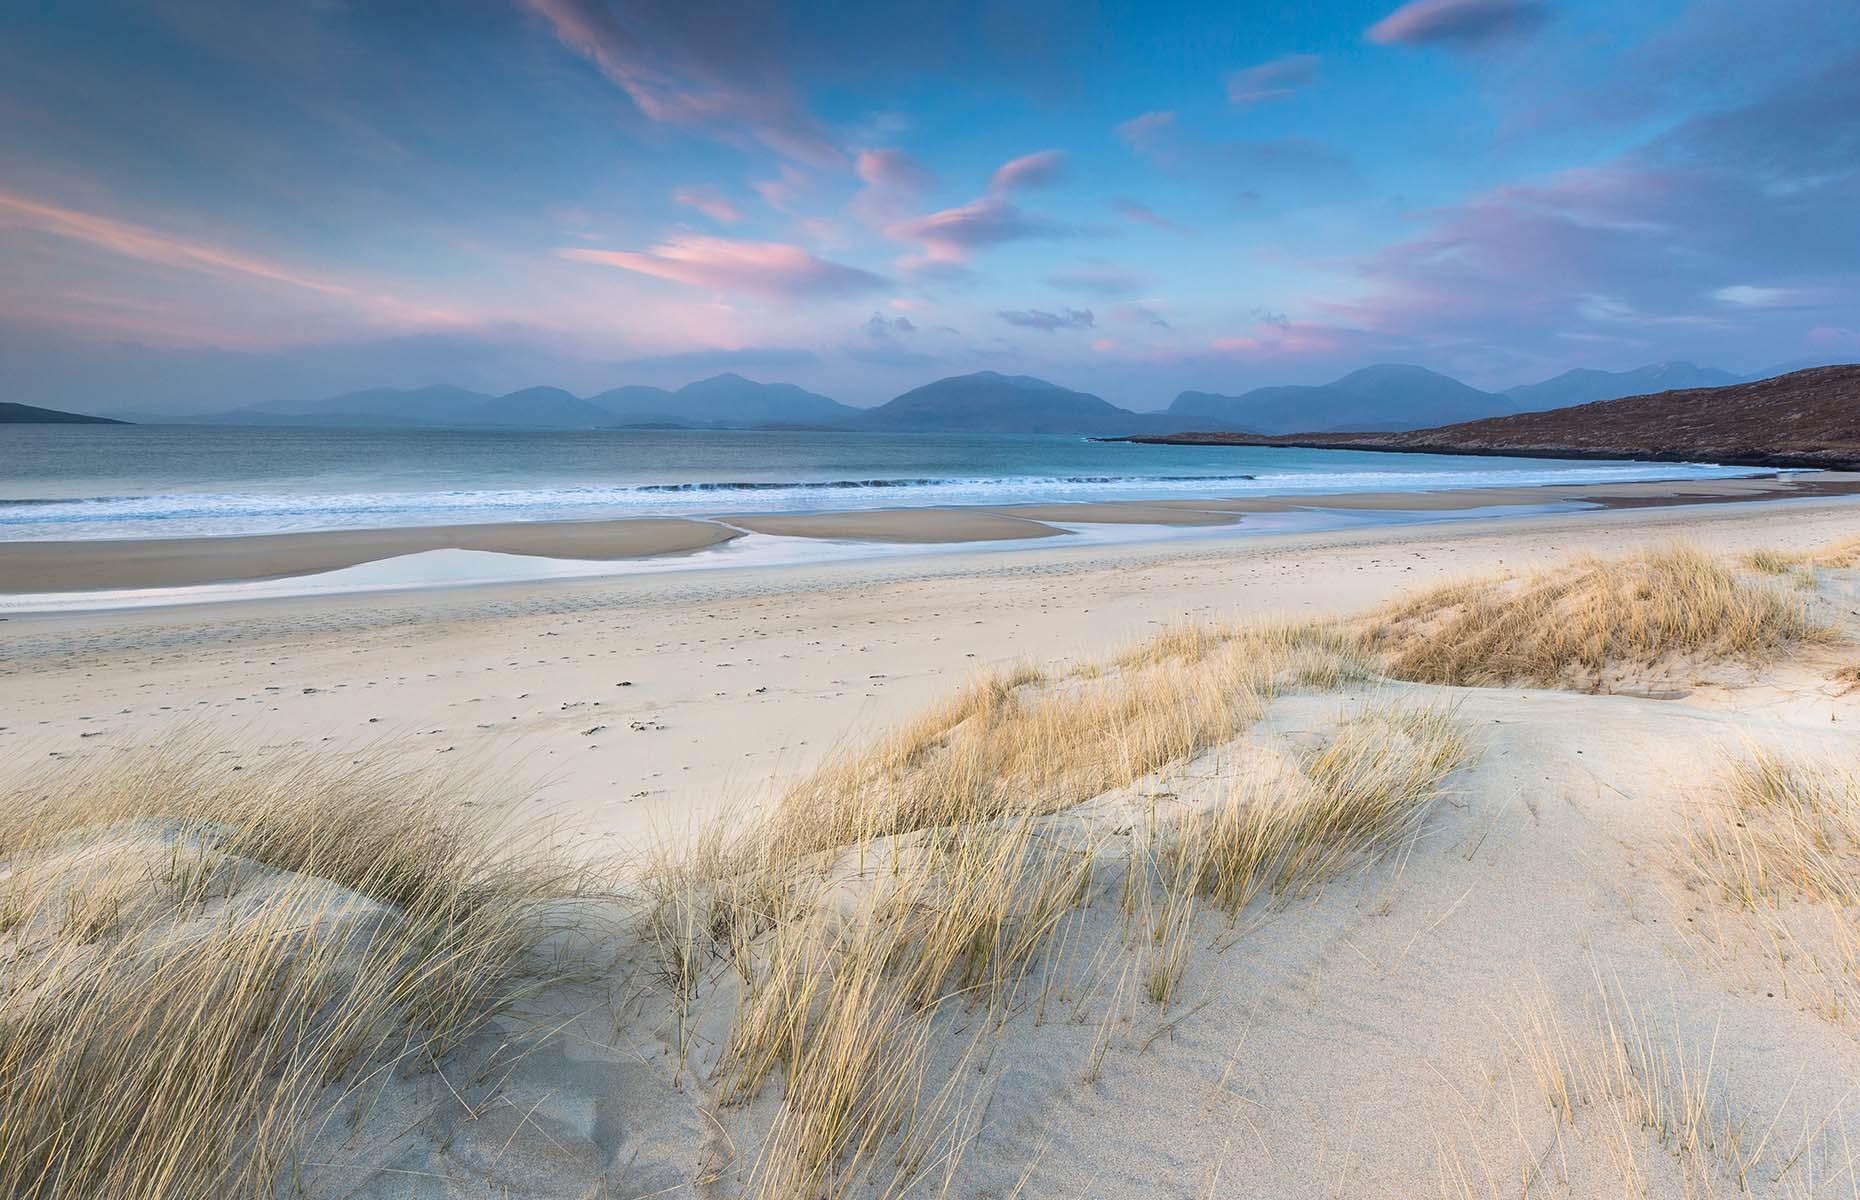 Tucked away on the western shores of South Harris in the Outer Hebrides, Luskentyre Sands is easily one of the most untouched places in the country. With miles of pristine white sand and eye-popping blue waters, it's often voted the most beautiful beach in the UK. Framed by the soaring peaks of the North Harris mountain range, the beach is Scotland’s version of a tropical paradise.